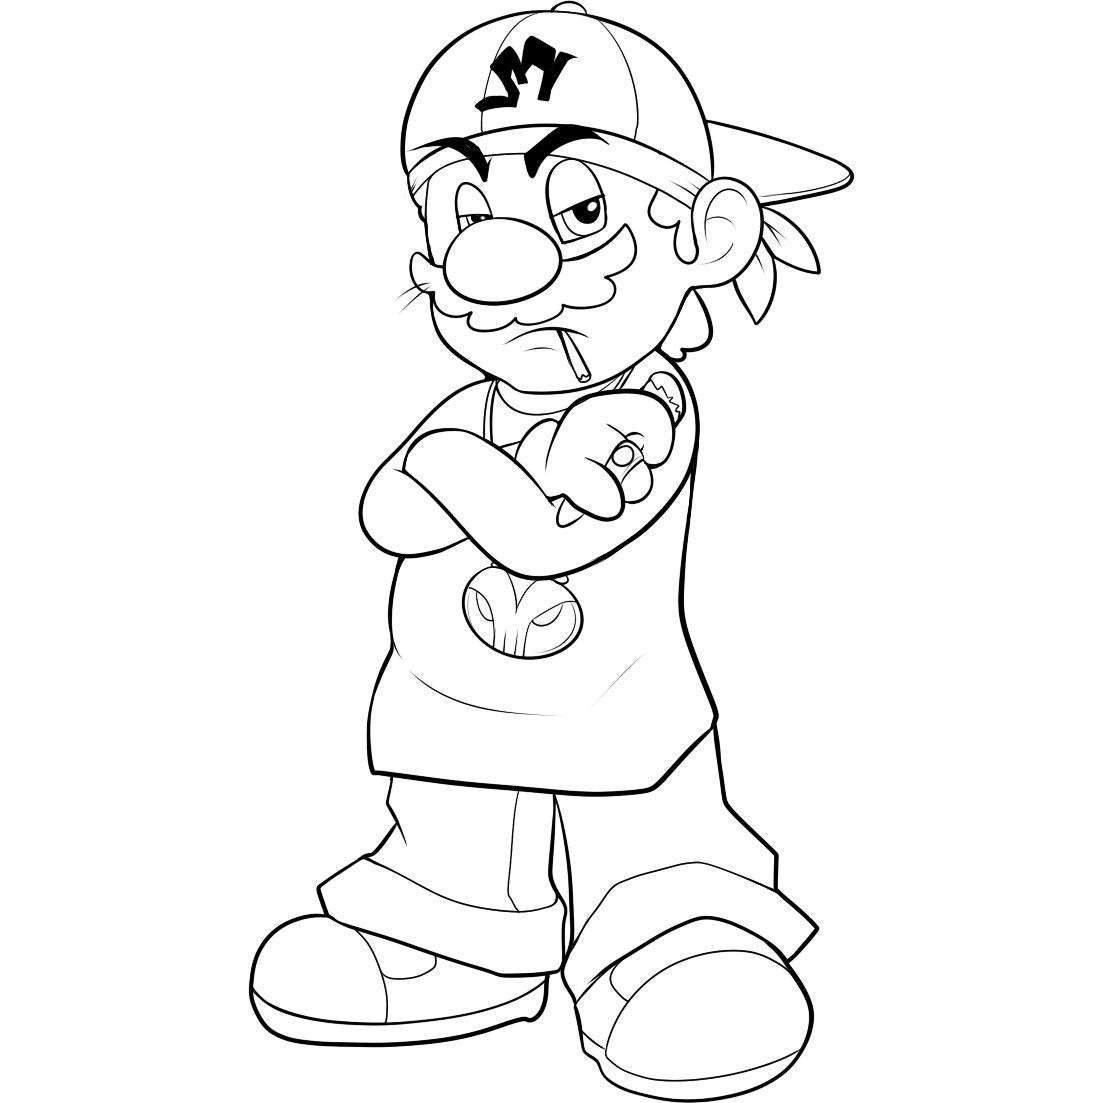 Mario Kart 8 Coloring Pages | Free download on ClipArtMag